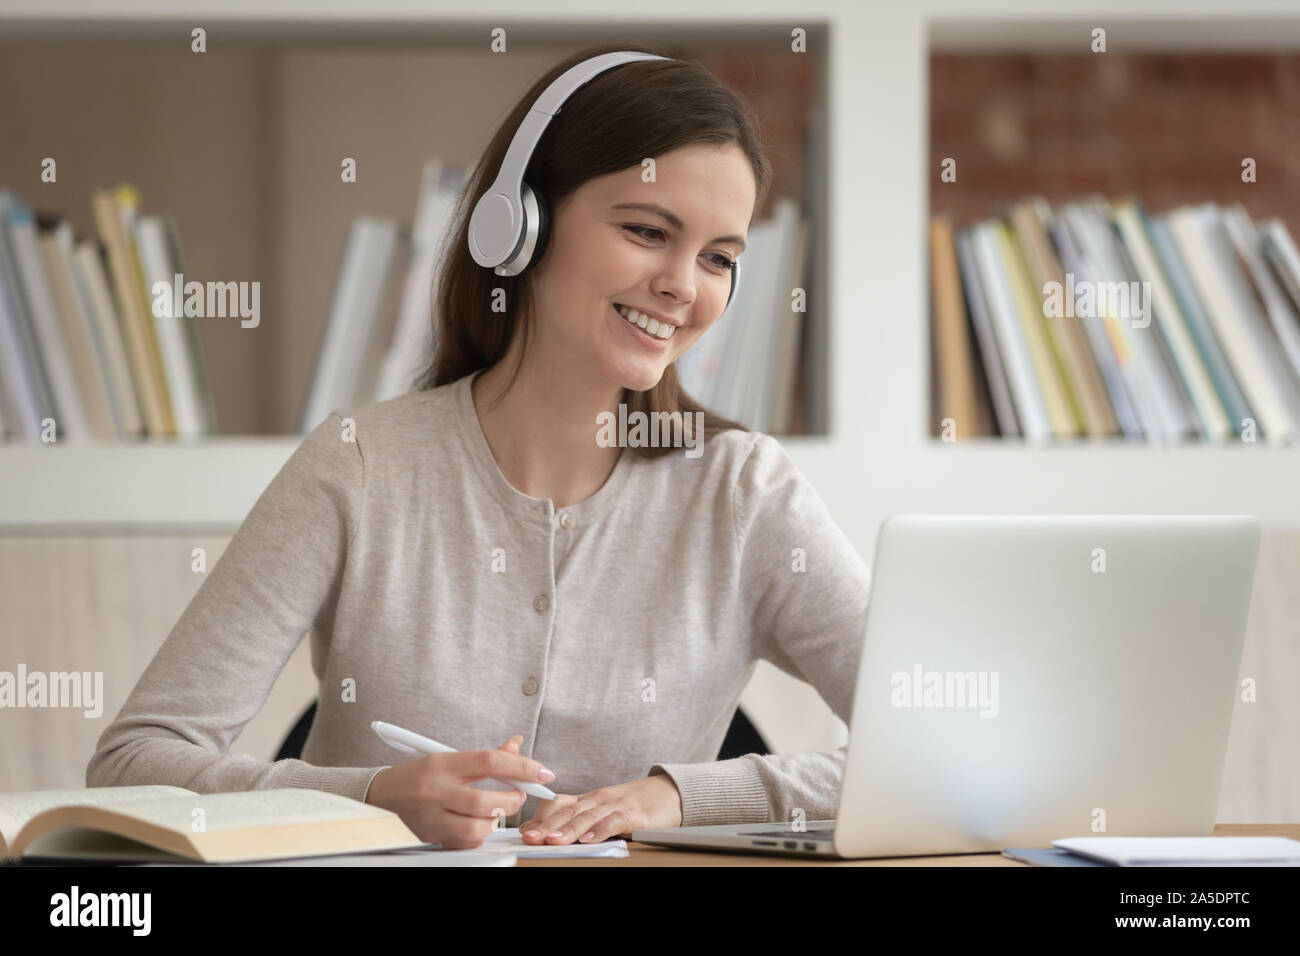 Girl in headphones look at pc screen noting studying indoors Stock Photo